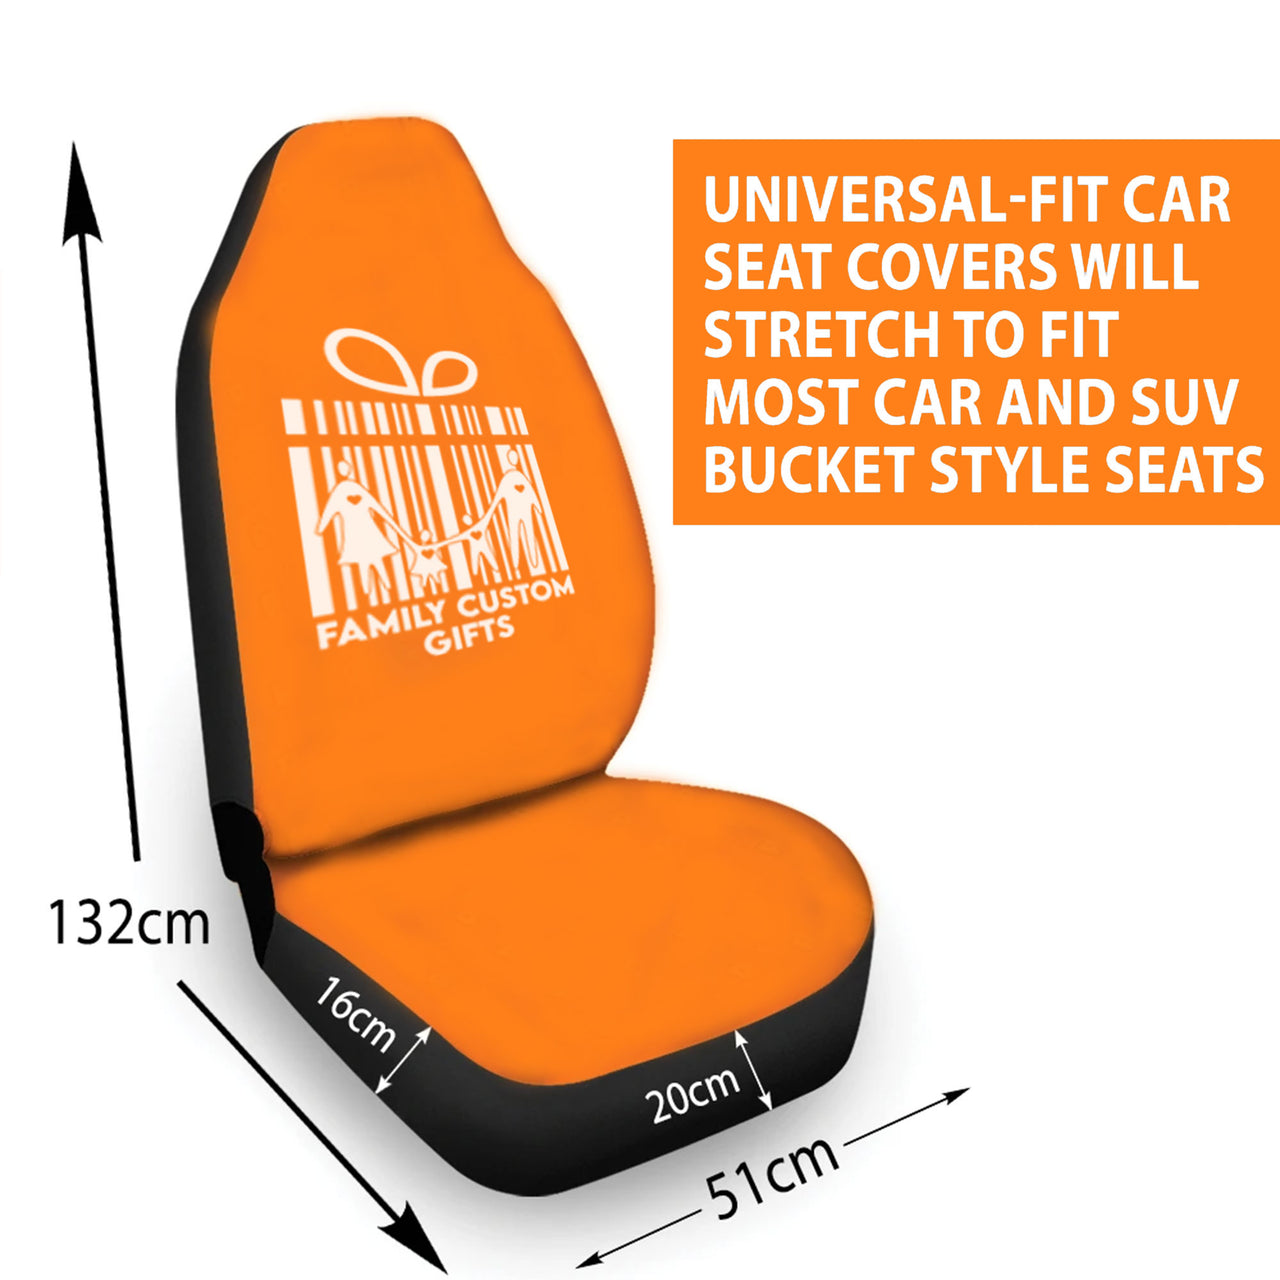 Custom Car Seat Cover Registered Nurse Gift Leather Seat Covers for Cars